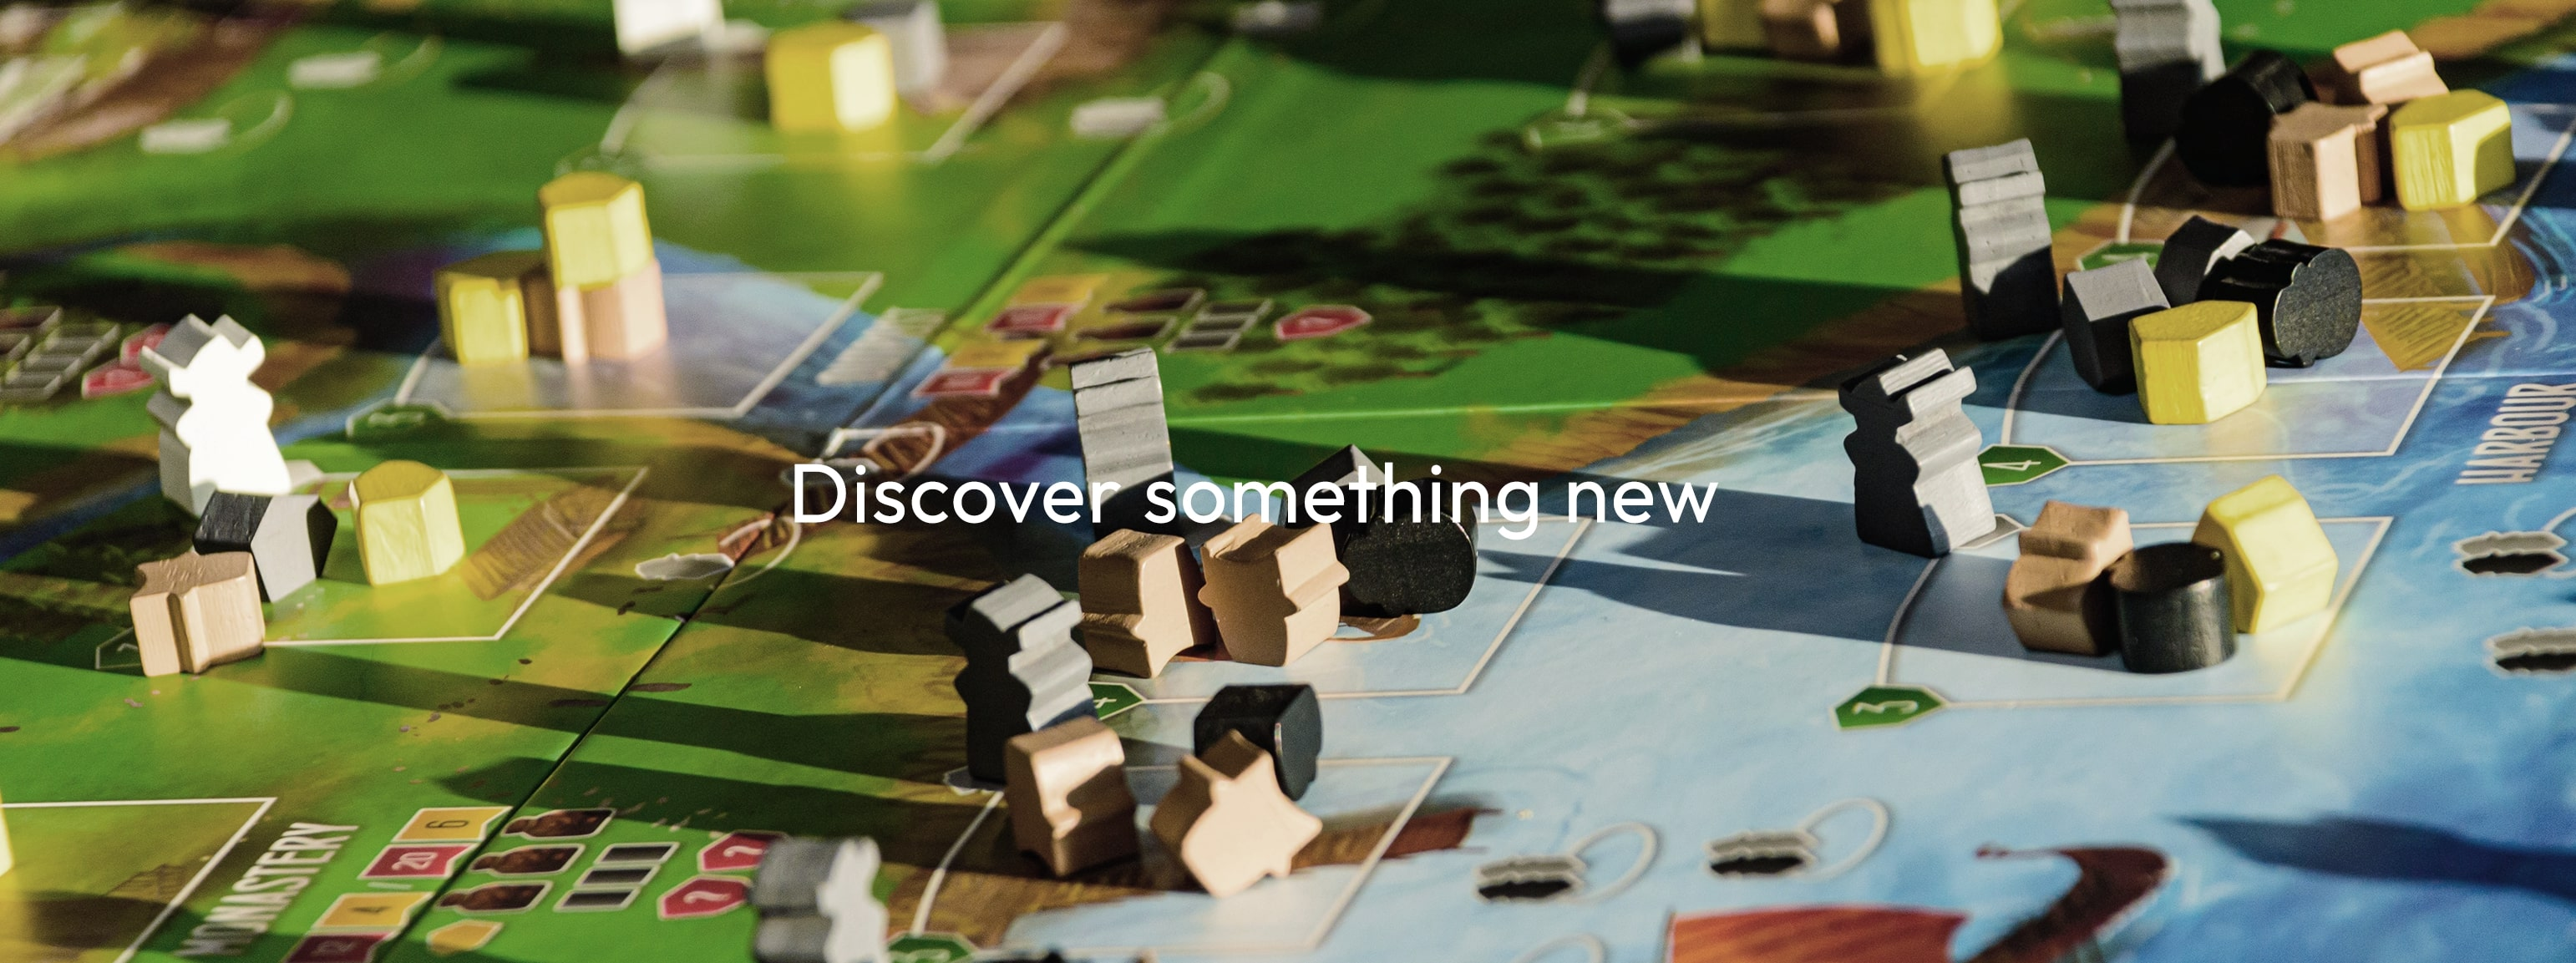 Discover something new! Start an adventure. Check out our newly listed and back in stock items!